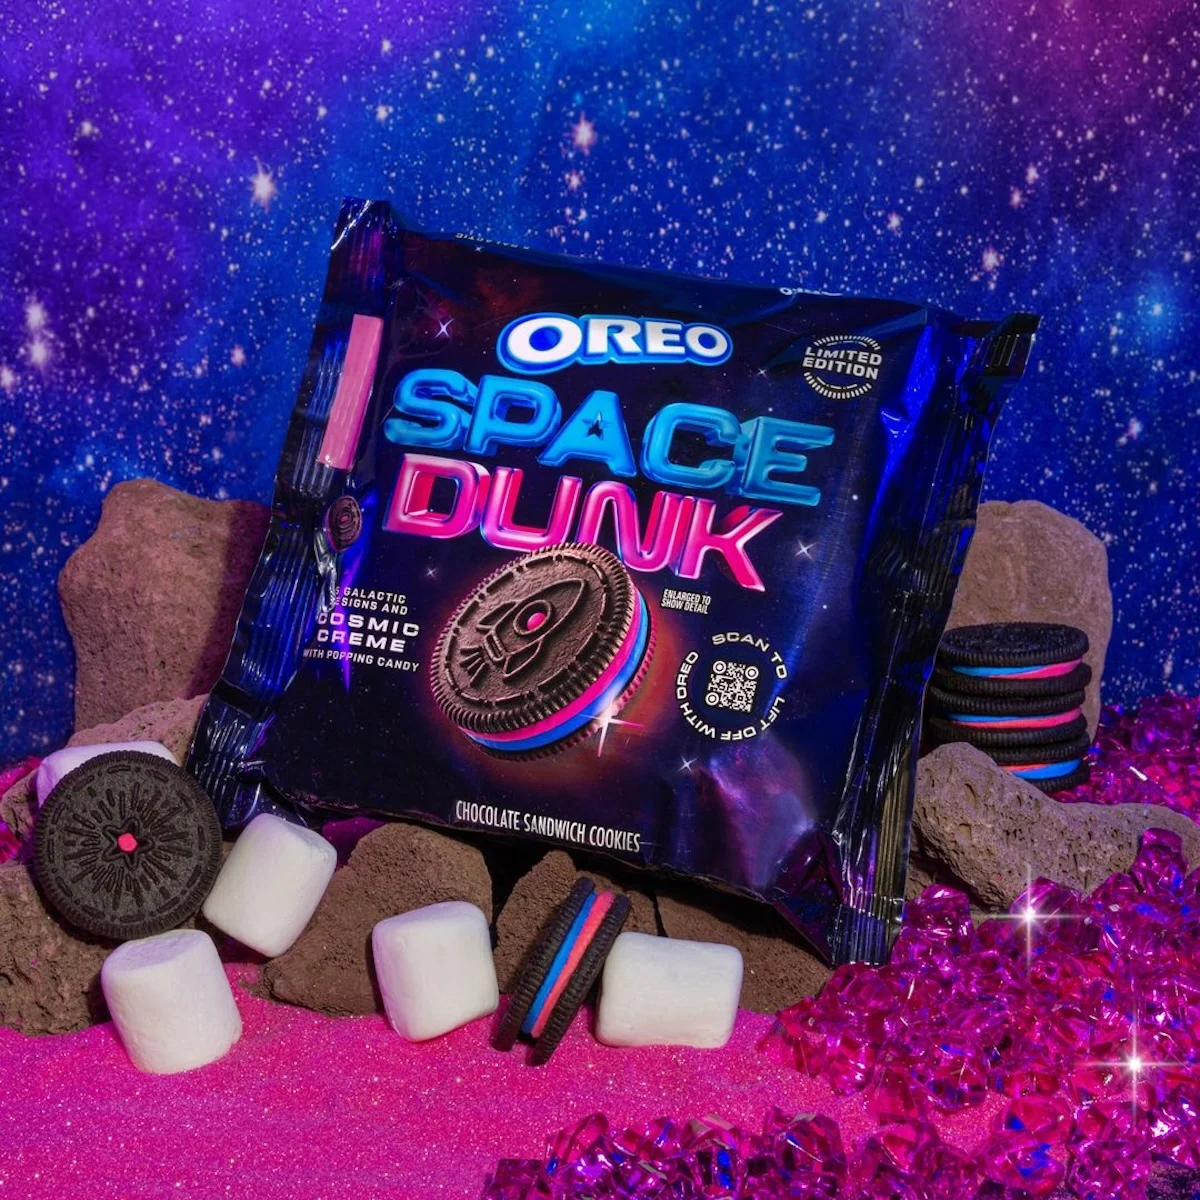 Oreo Announces a New Cookie Flavor That's Stuffed With Pink and Blue Creme